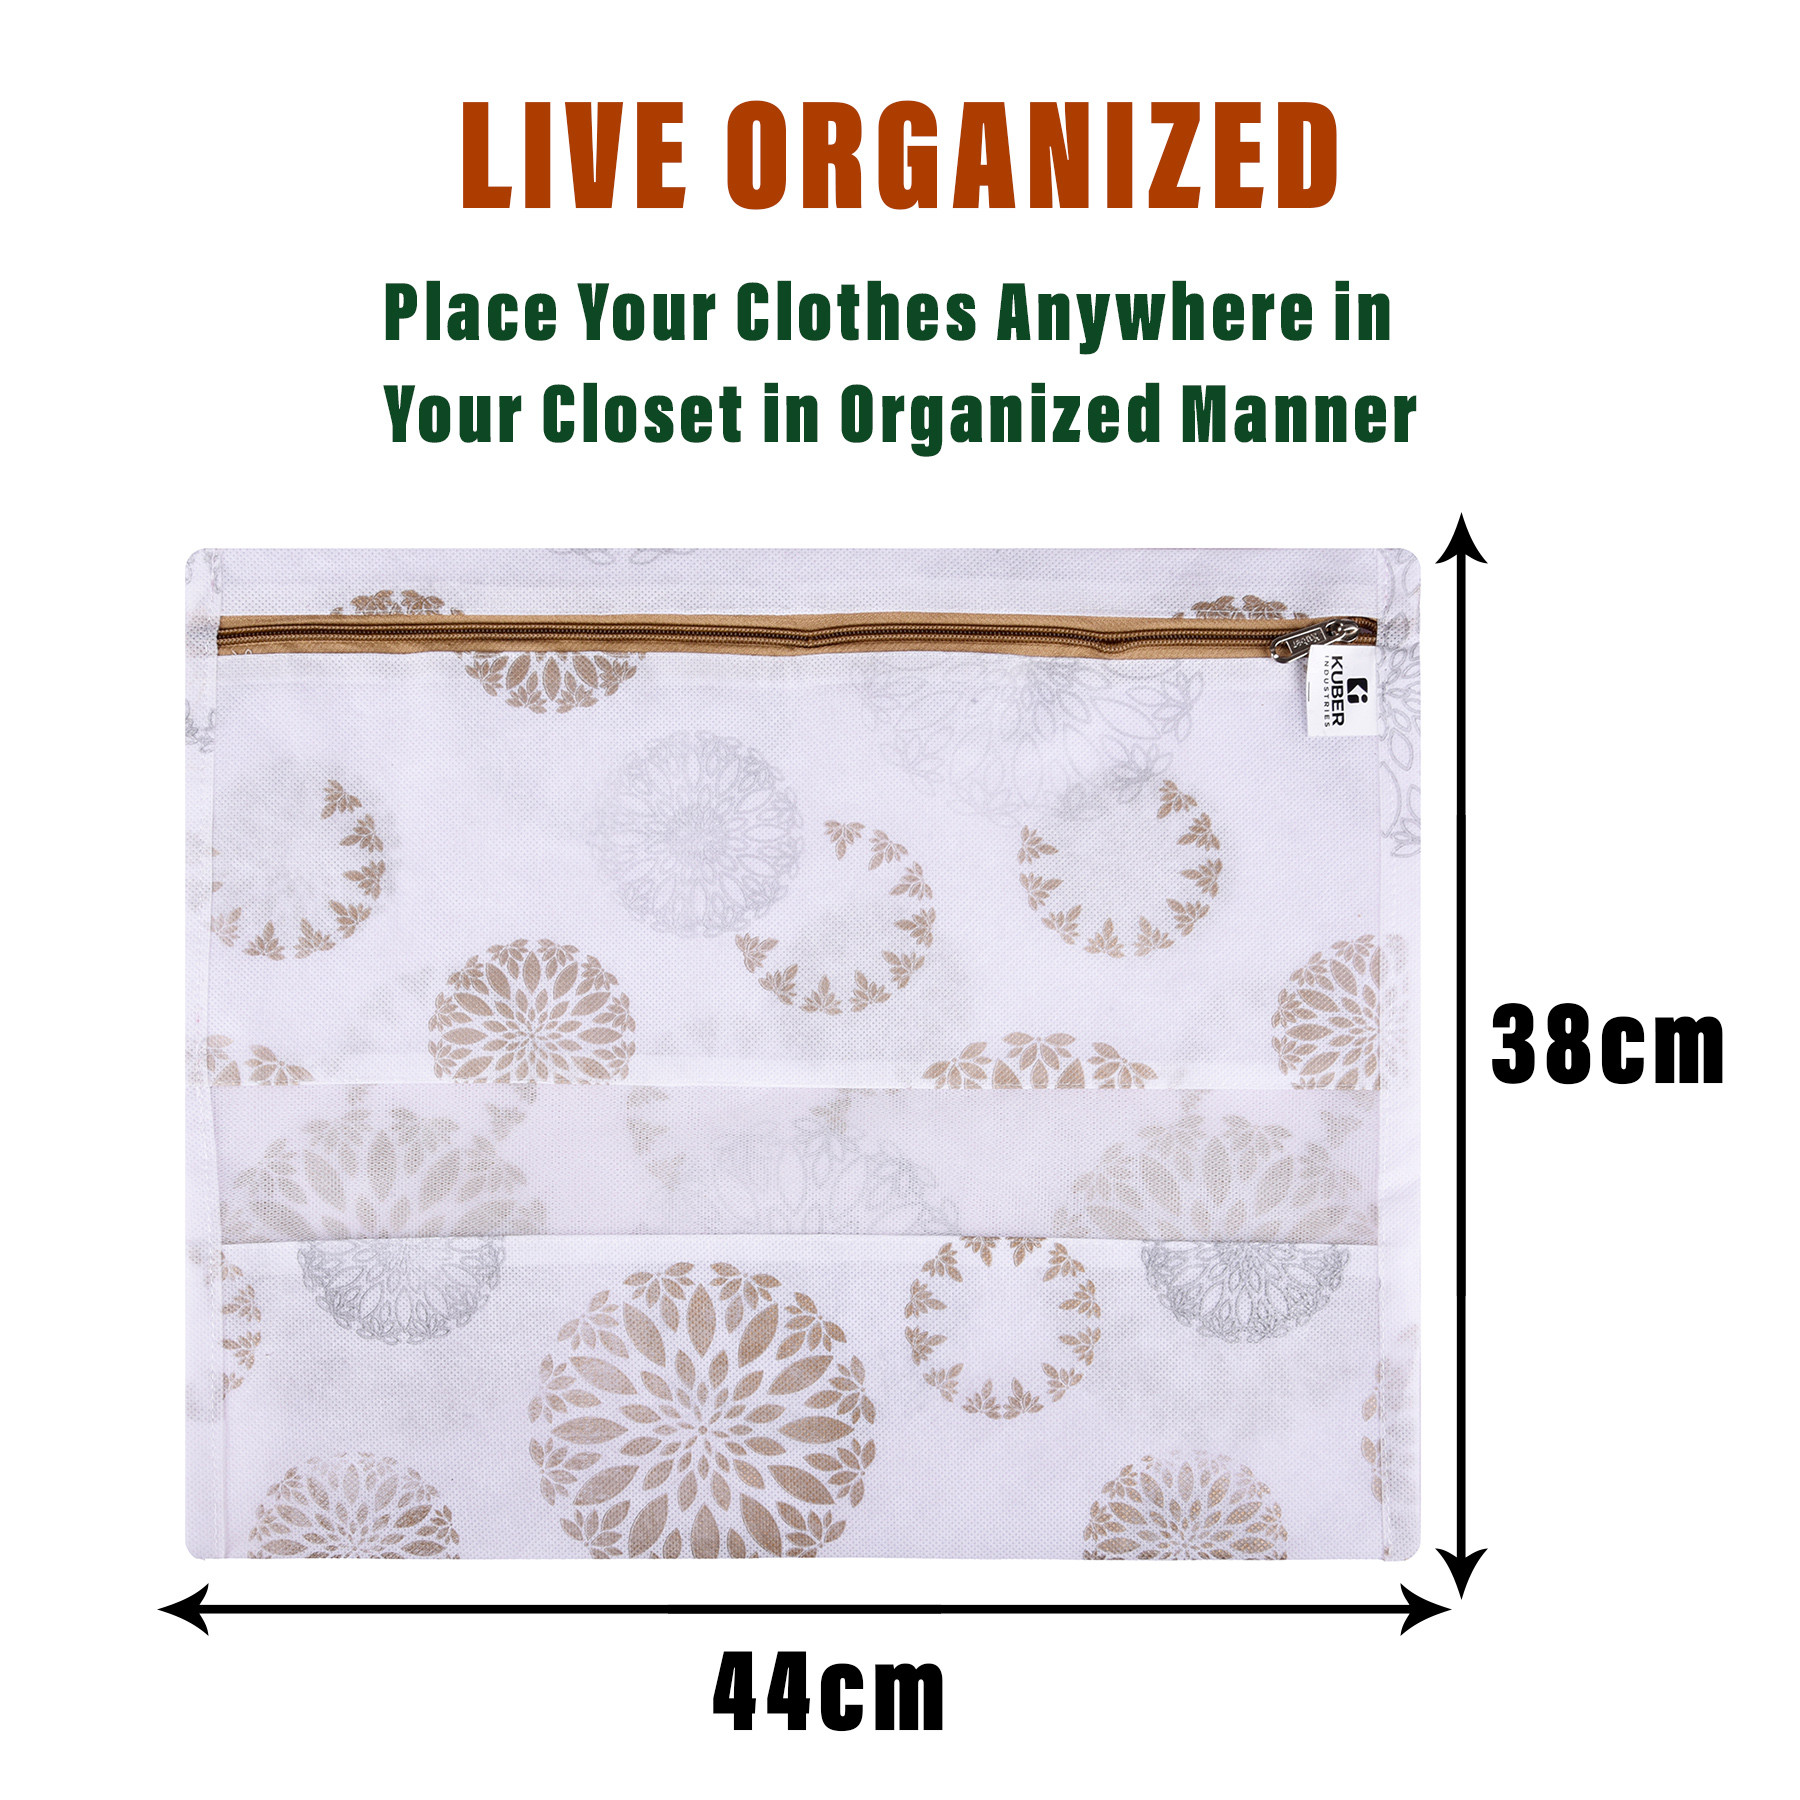 Kuber Industries Saree Bags | Clothes Bags for Storage | Non-Woven Wardrobe Organizer | Mesh Window Cloth Storage Bags Set | Single Packing Saree Bags | Printed | Sky Blue & White